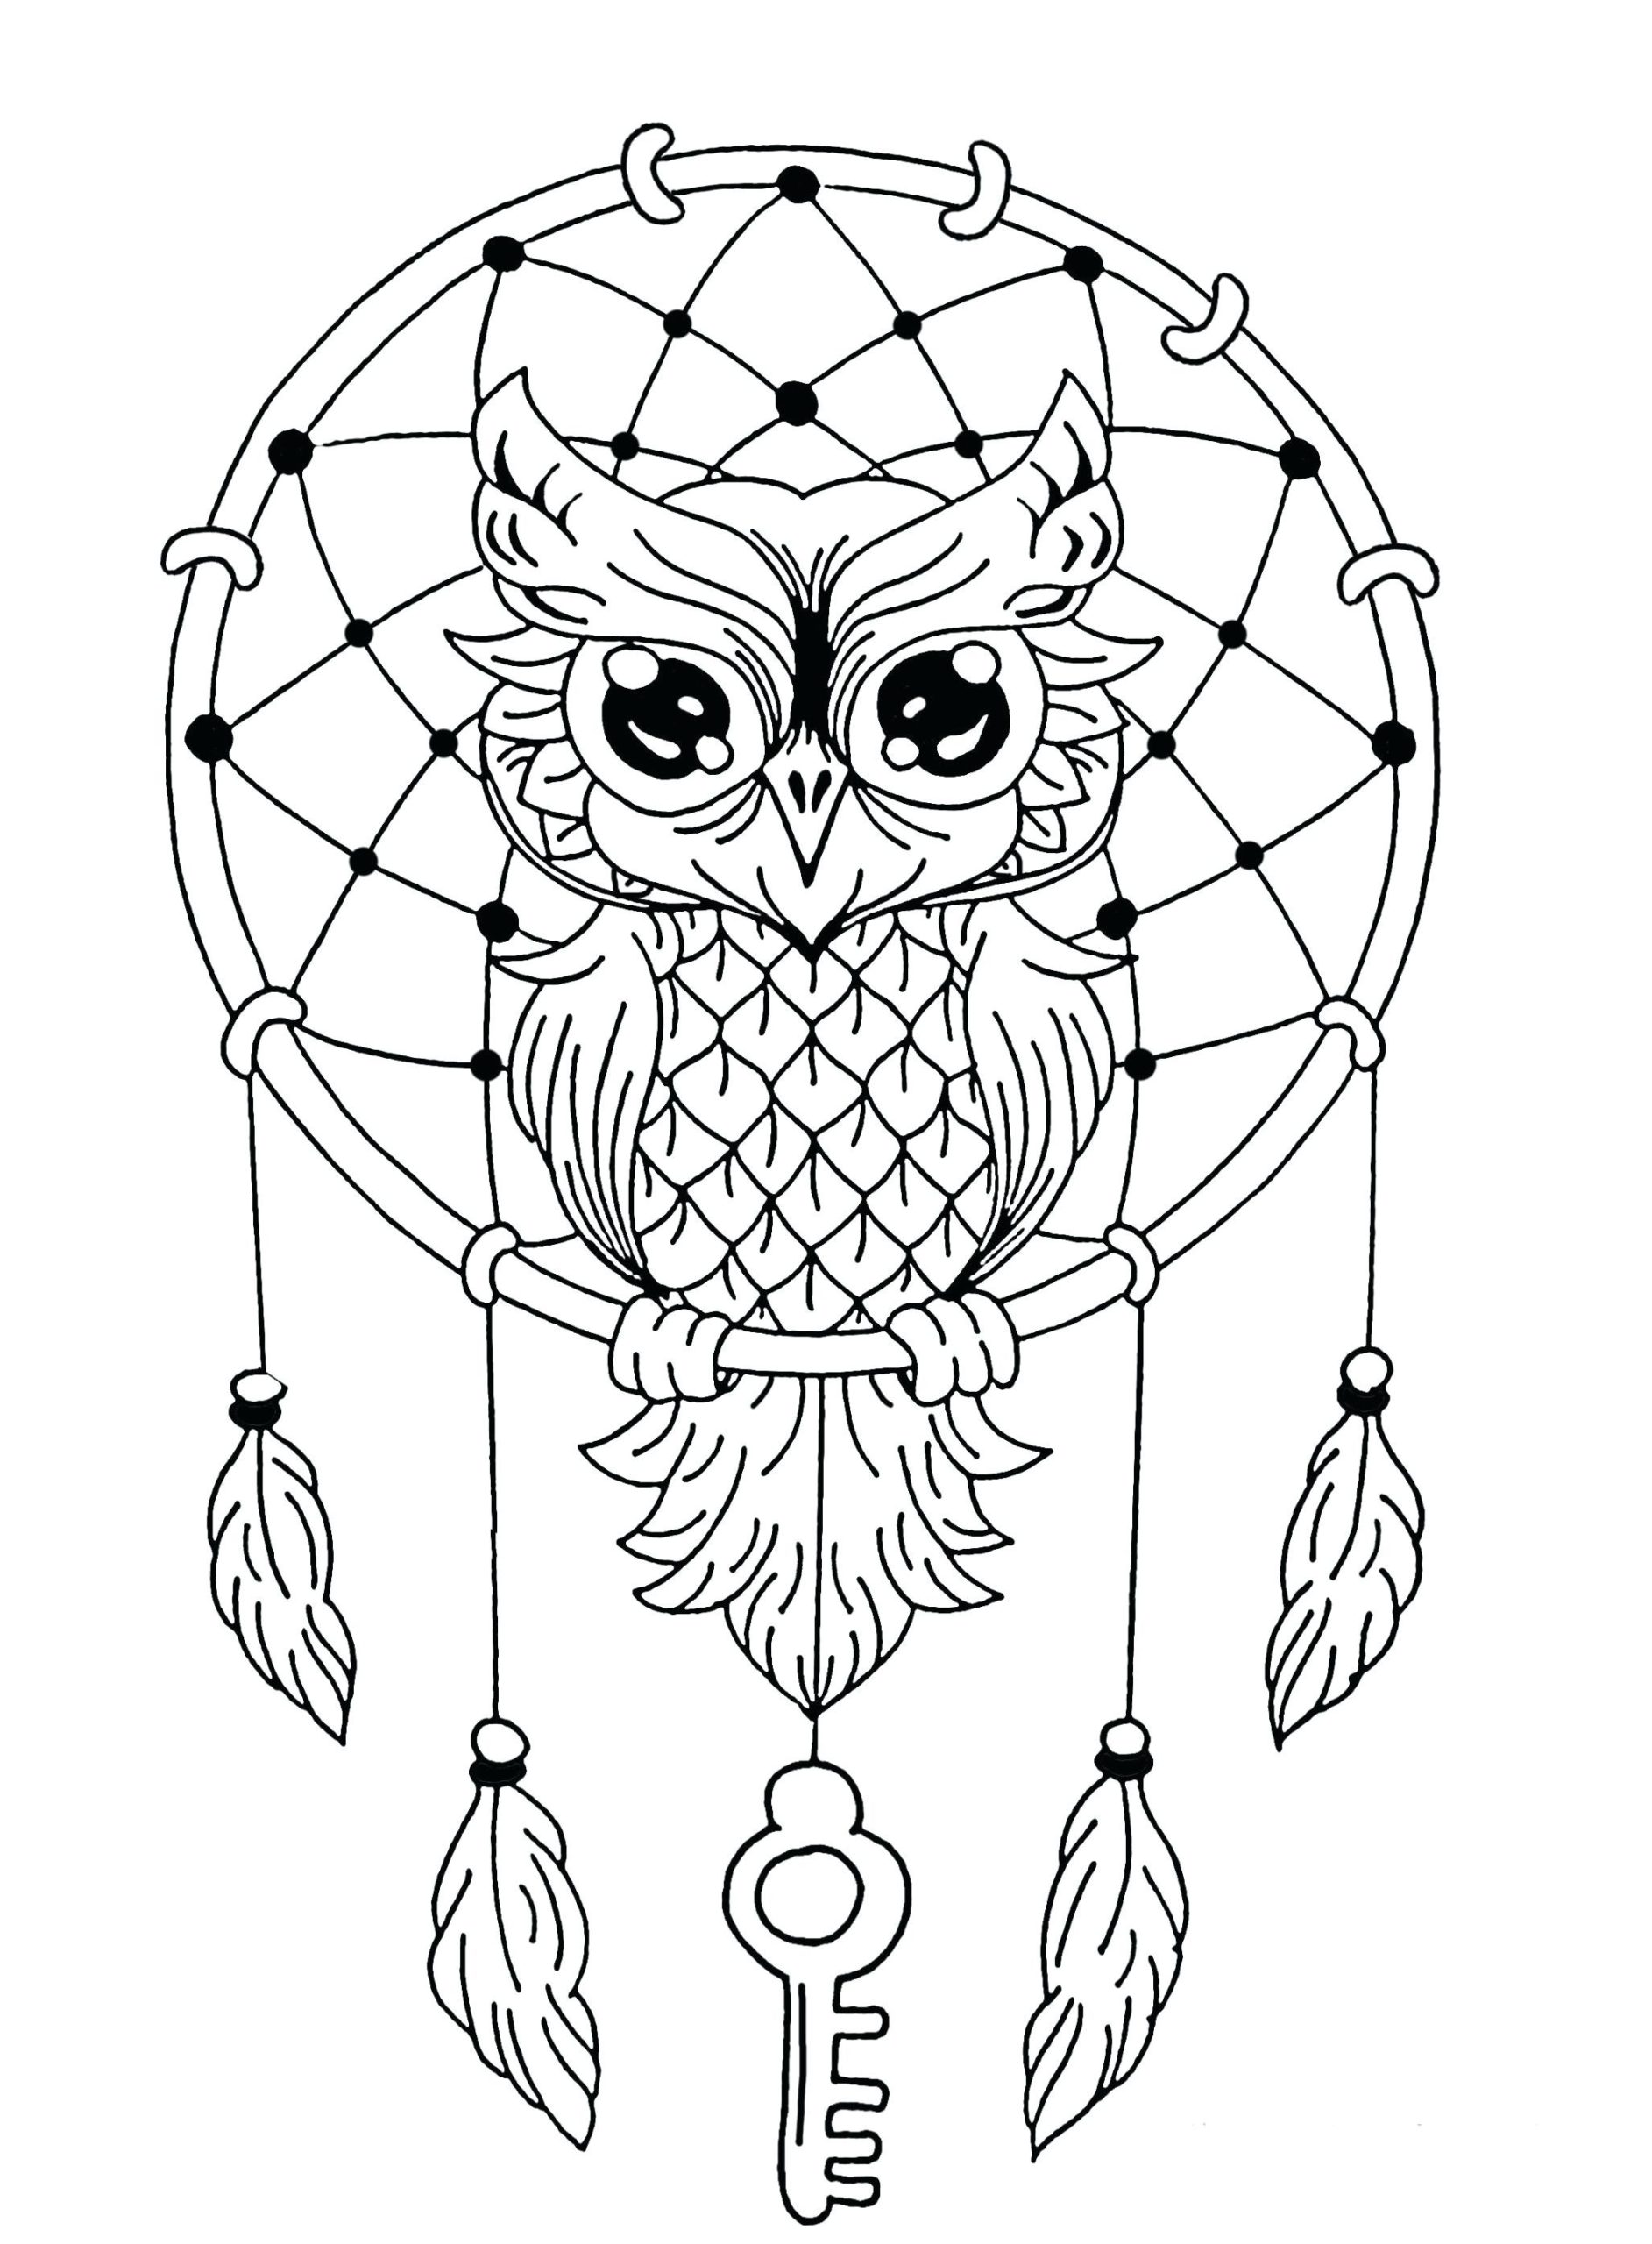 Coloring Pages : Coloring Book Odd Easy Mandala Animal Simple For ...